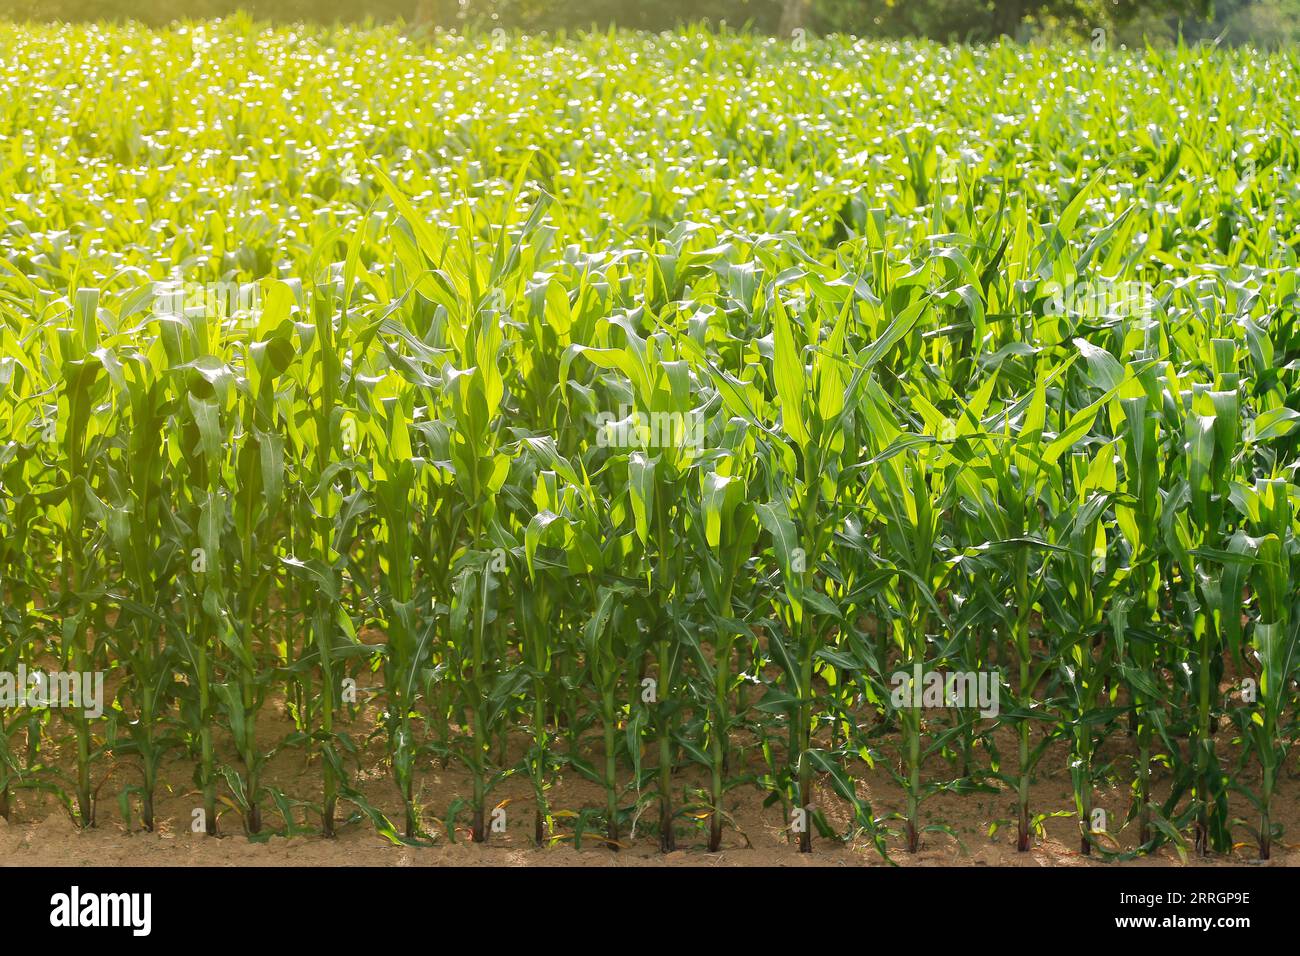 cornfield - corn plantation - detail of medium size crop without ears Stock Photo